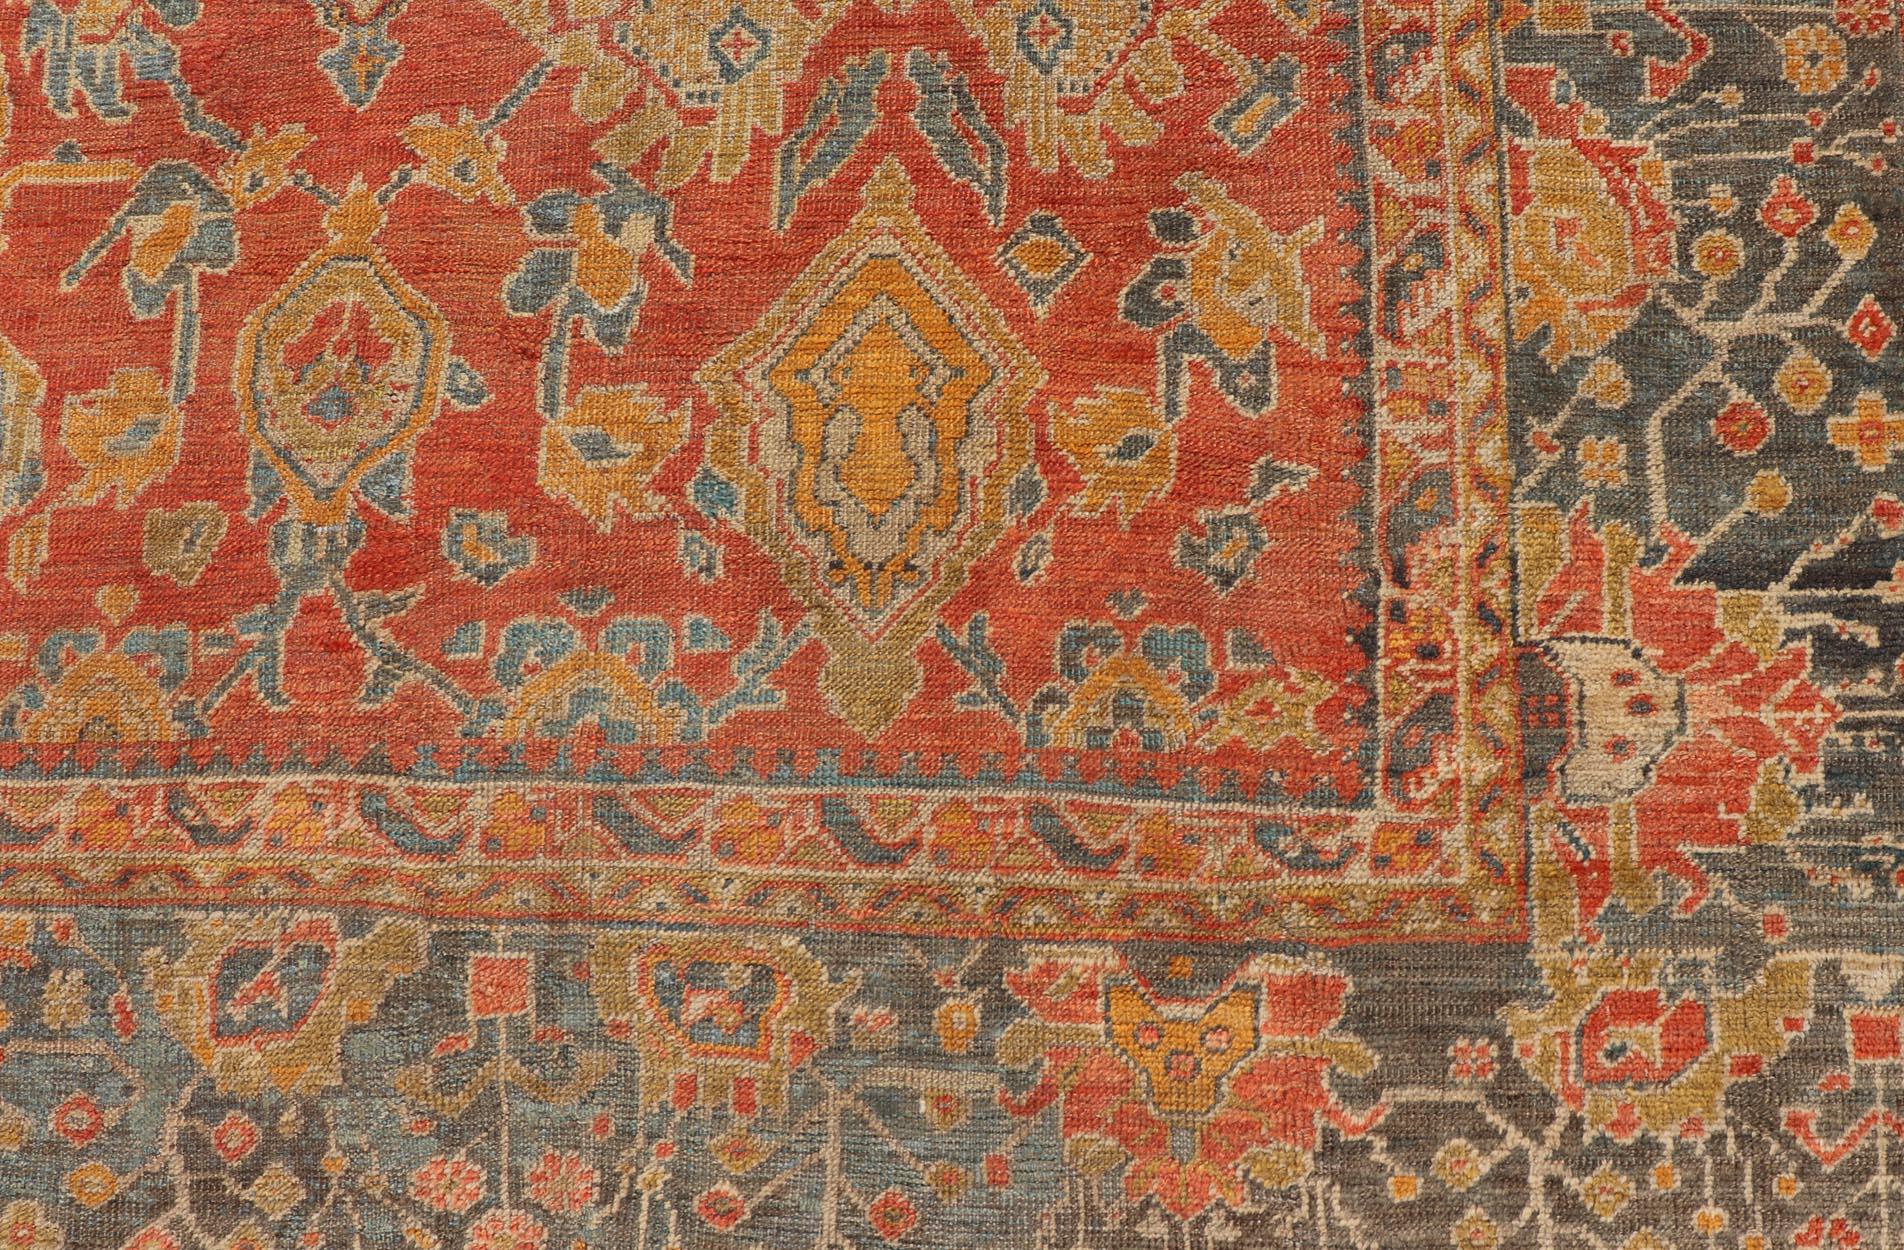 Antique Turkish Oushak Rug in Terracotta With All-Over Flower, Leaves and Vines  For Sale 3